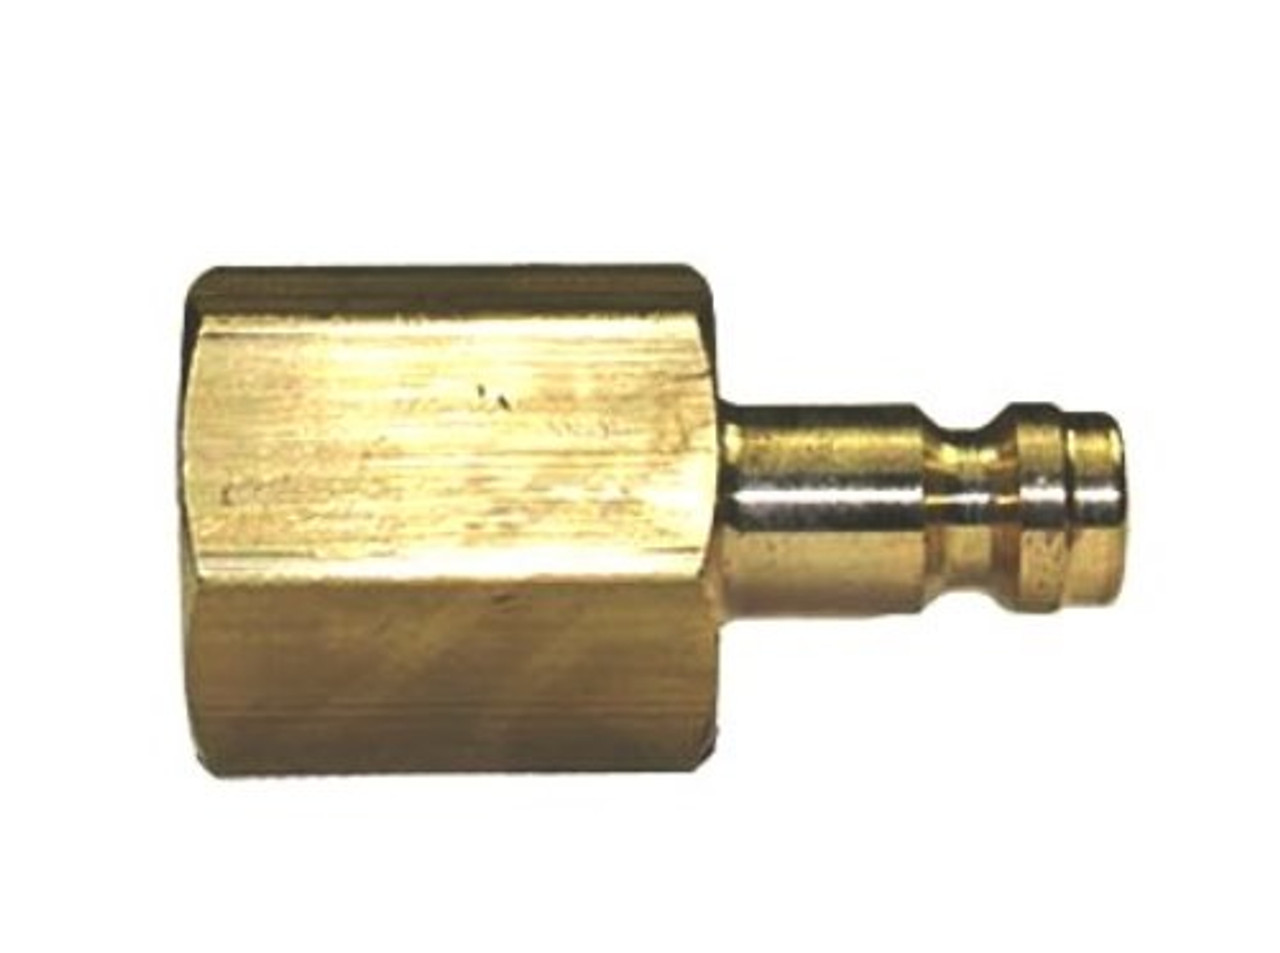 ZHCK-G 5/8-18 Right Hand Internal Thread
Indicates Gas Fitting